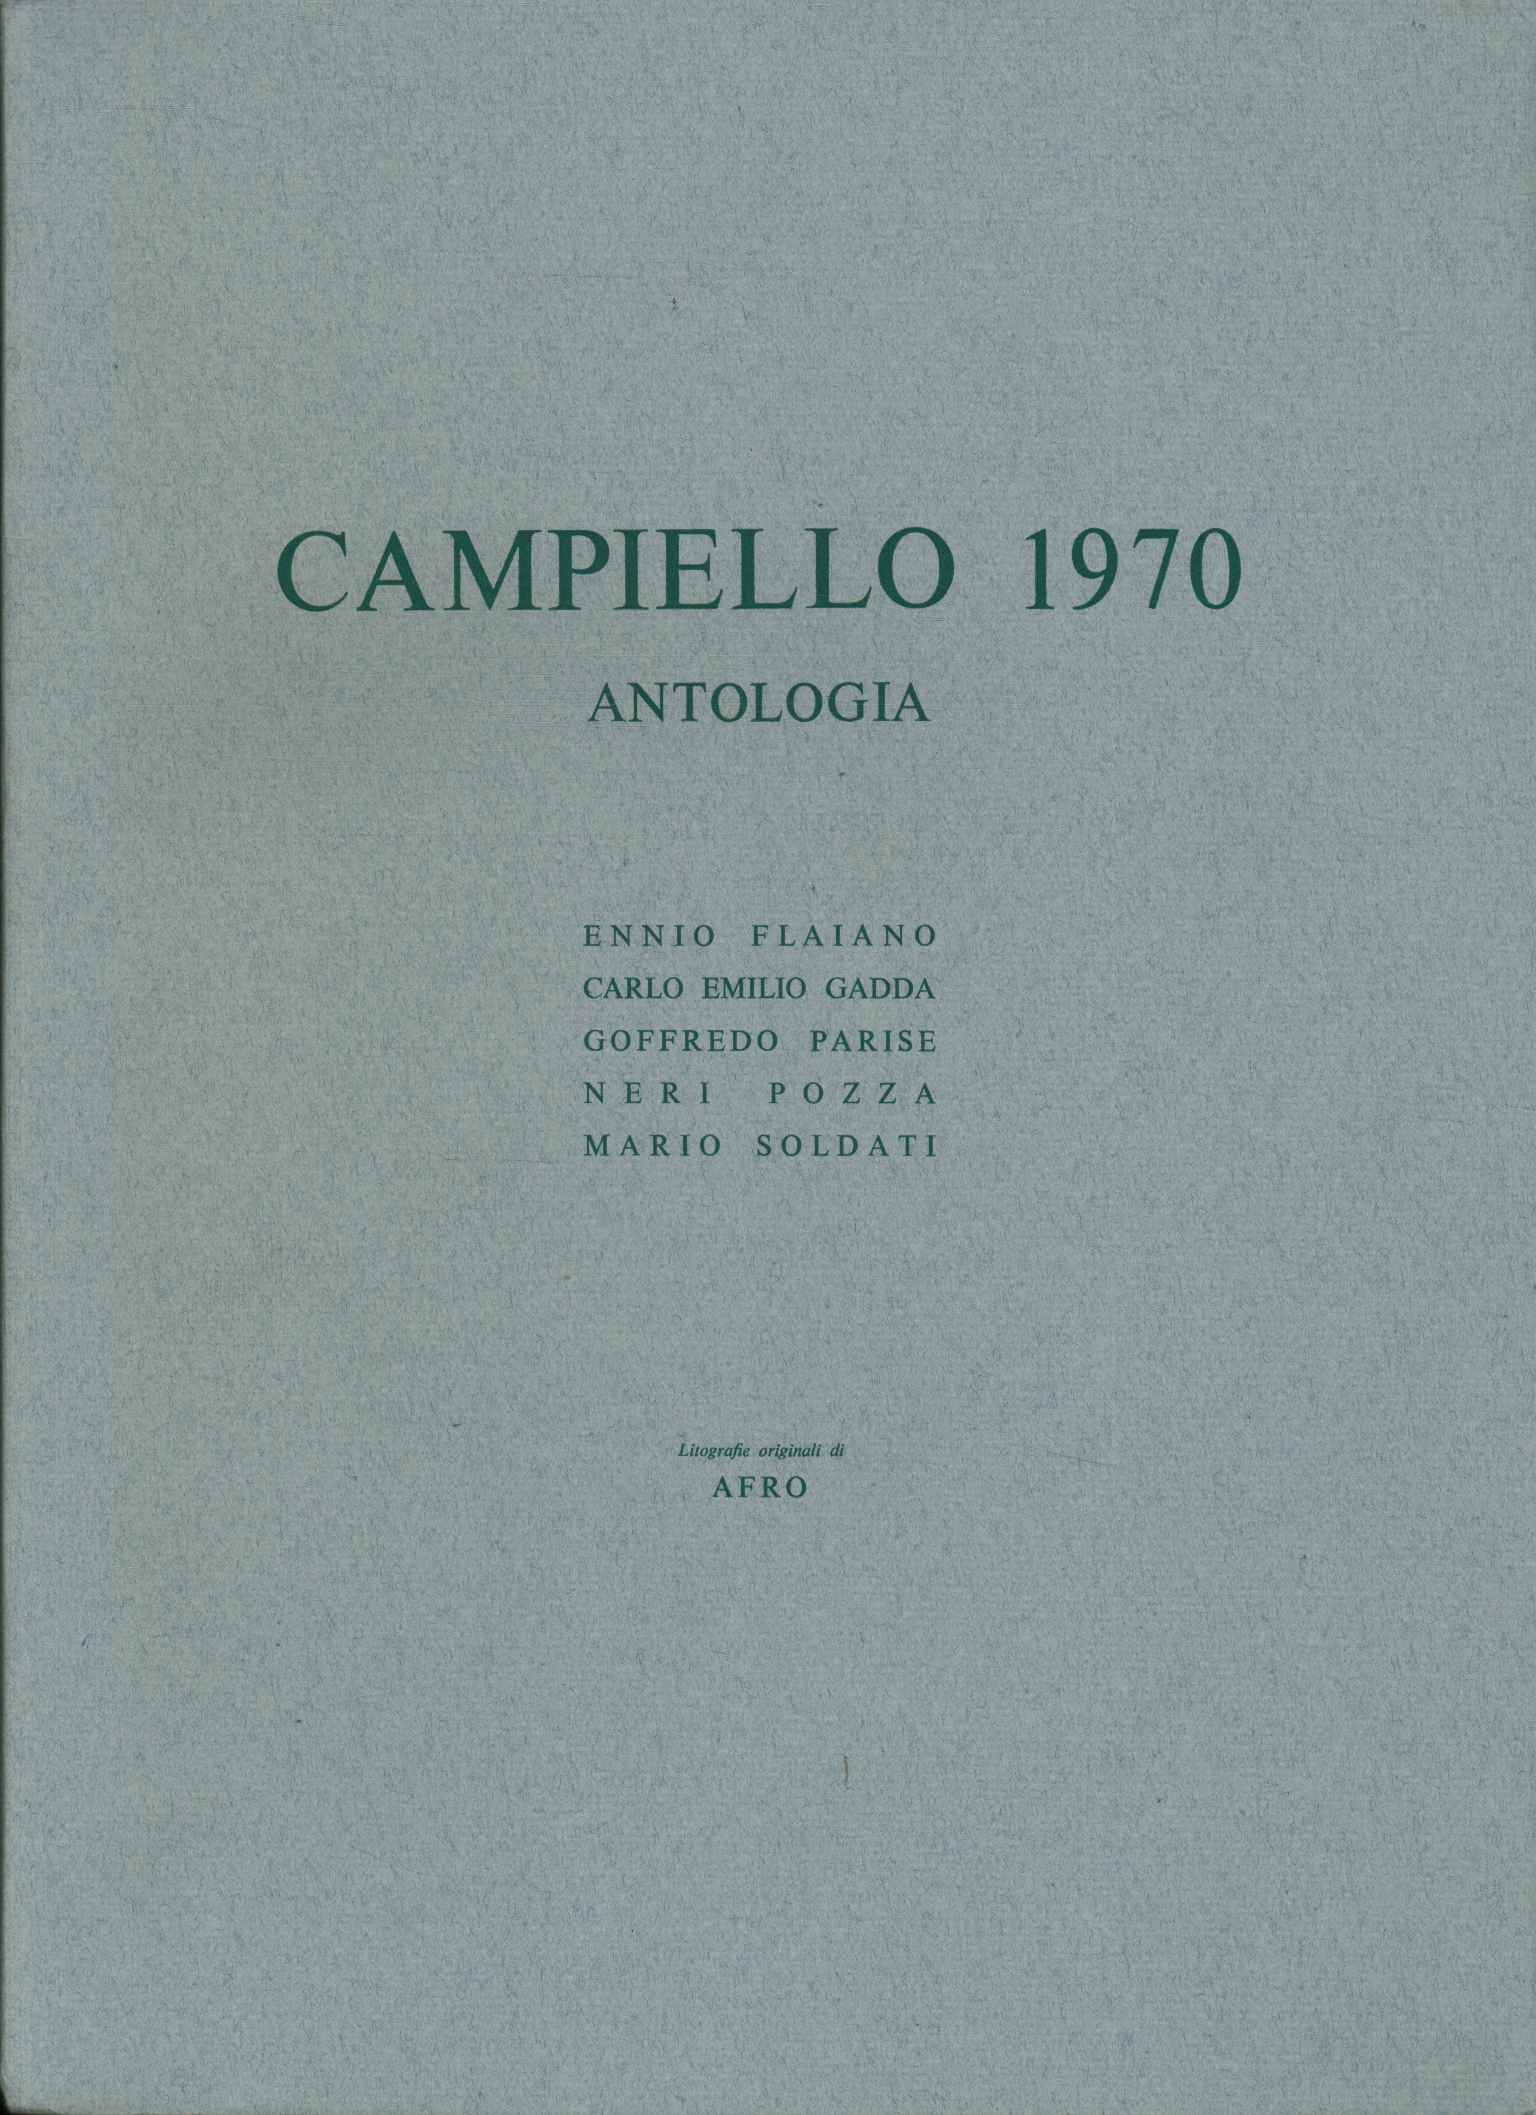 Anthology by Campiello 1970